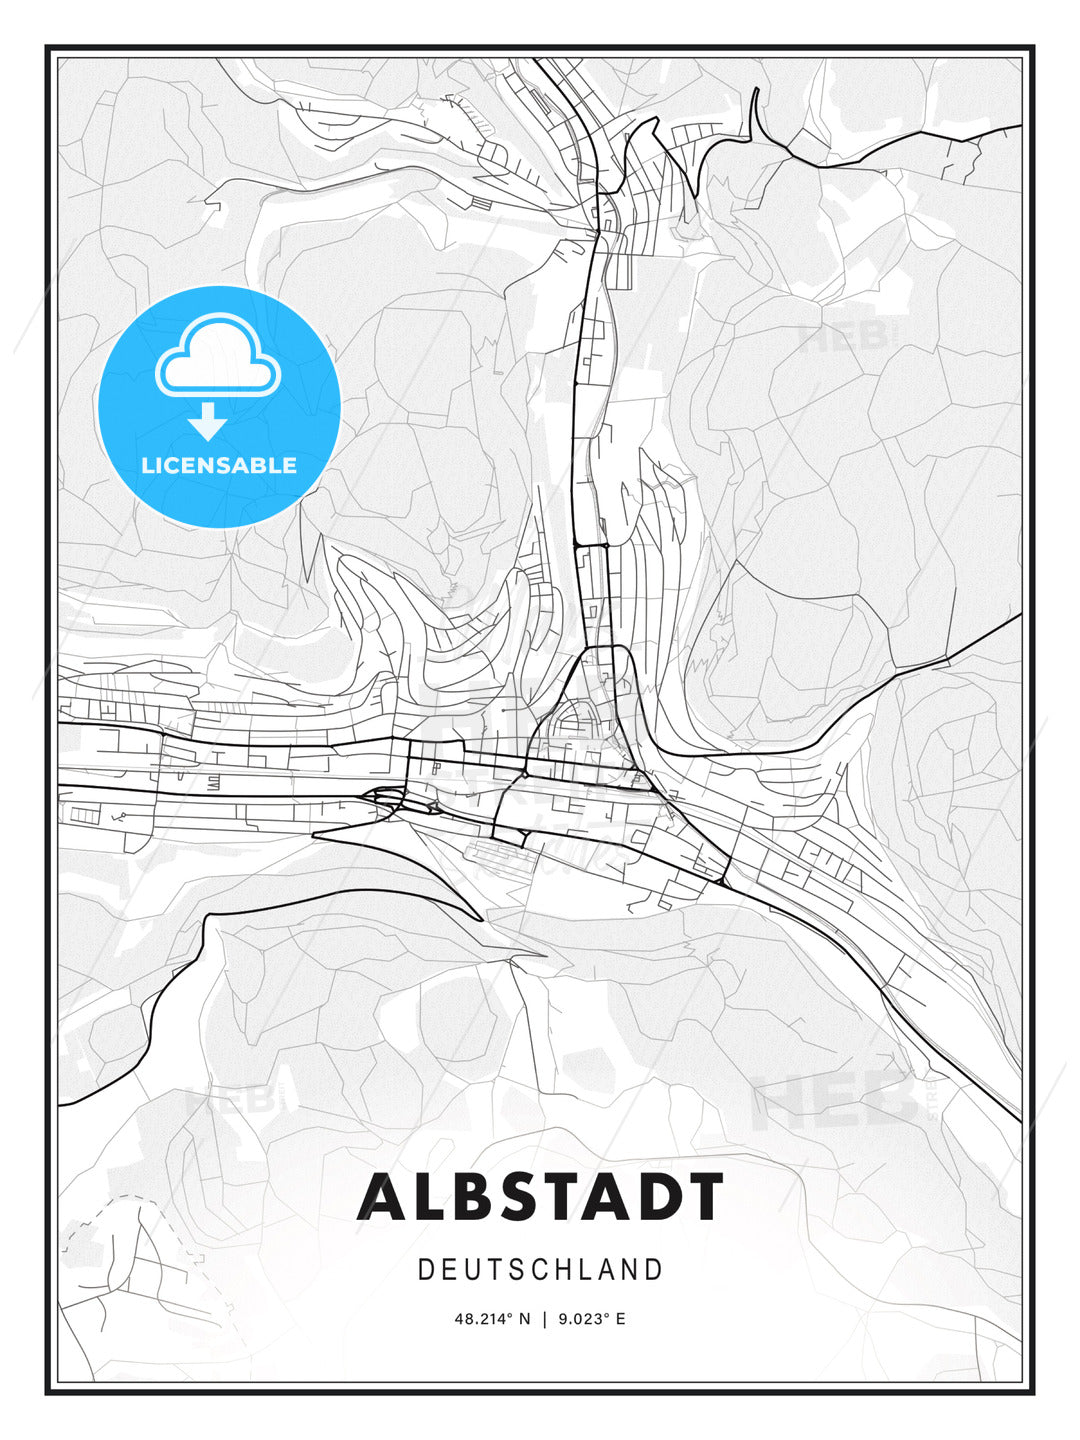 Albstadt, Germany, Modern Print Template in Various Formats - HEBSTREITS Sketches